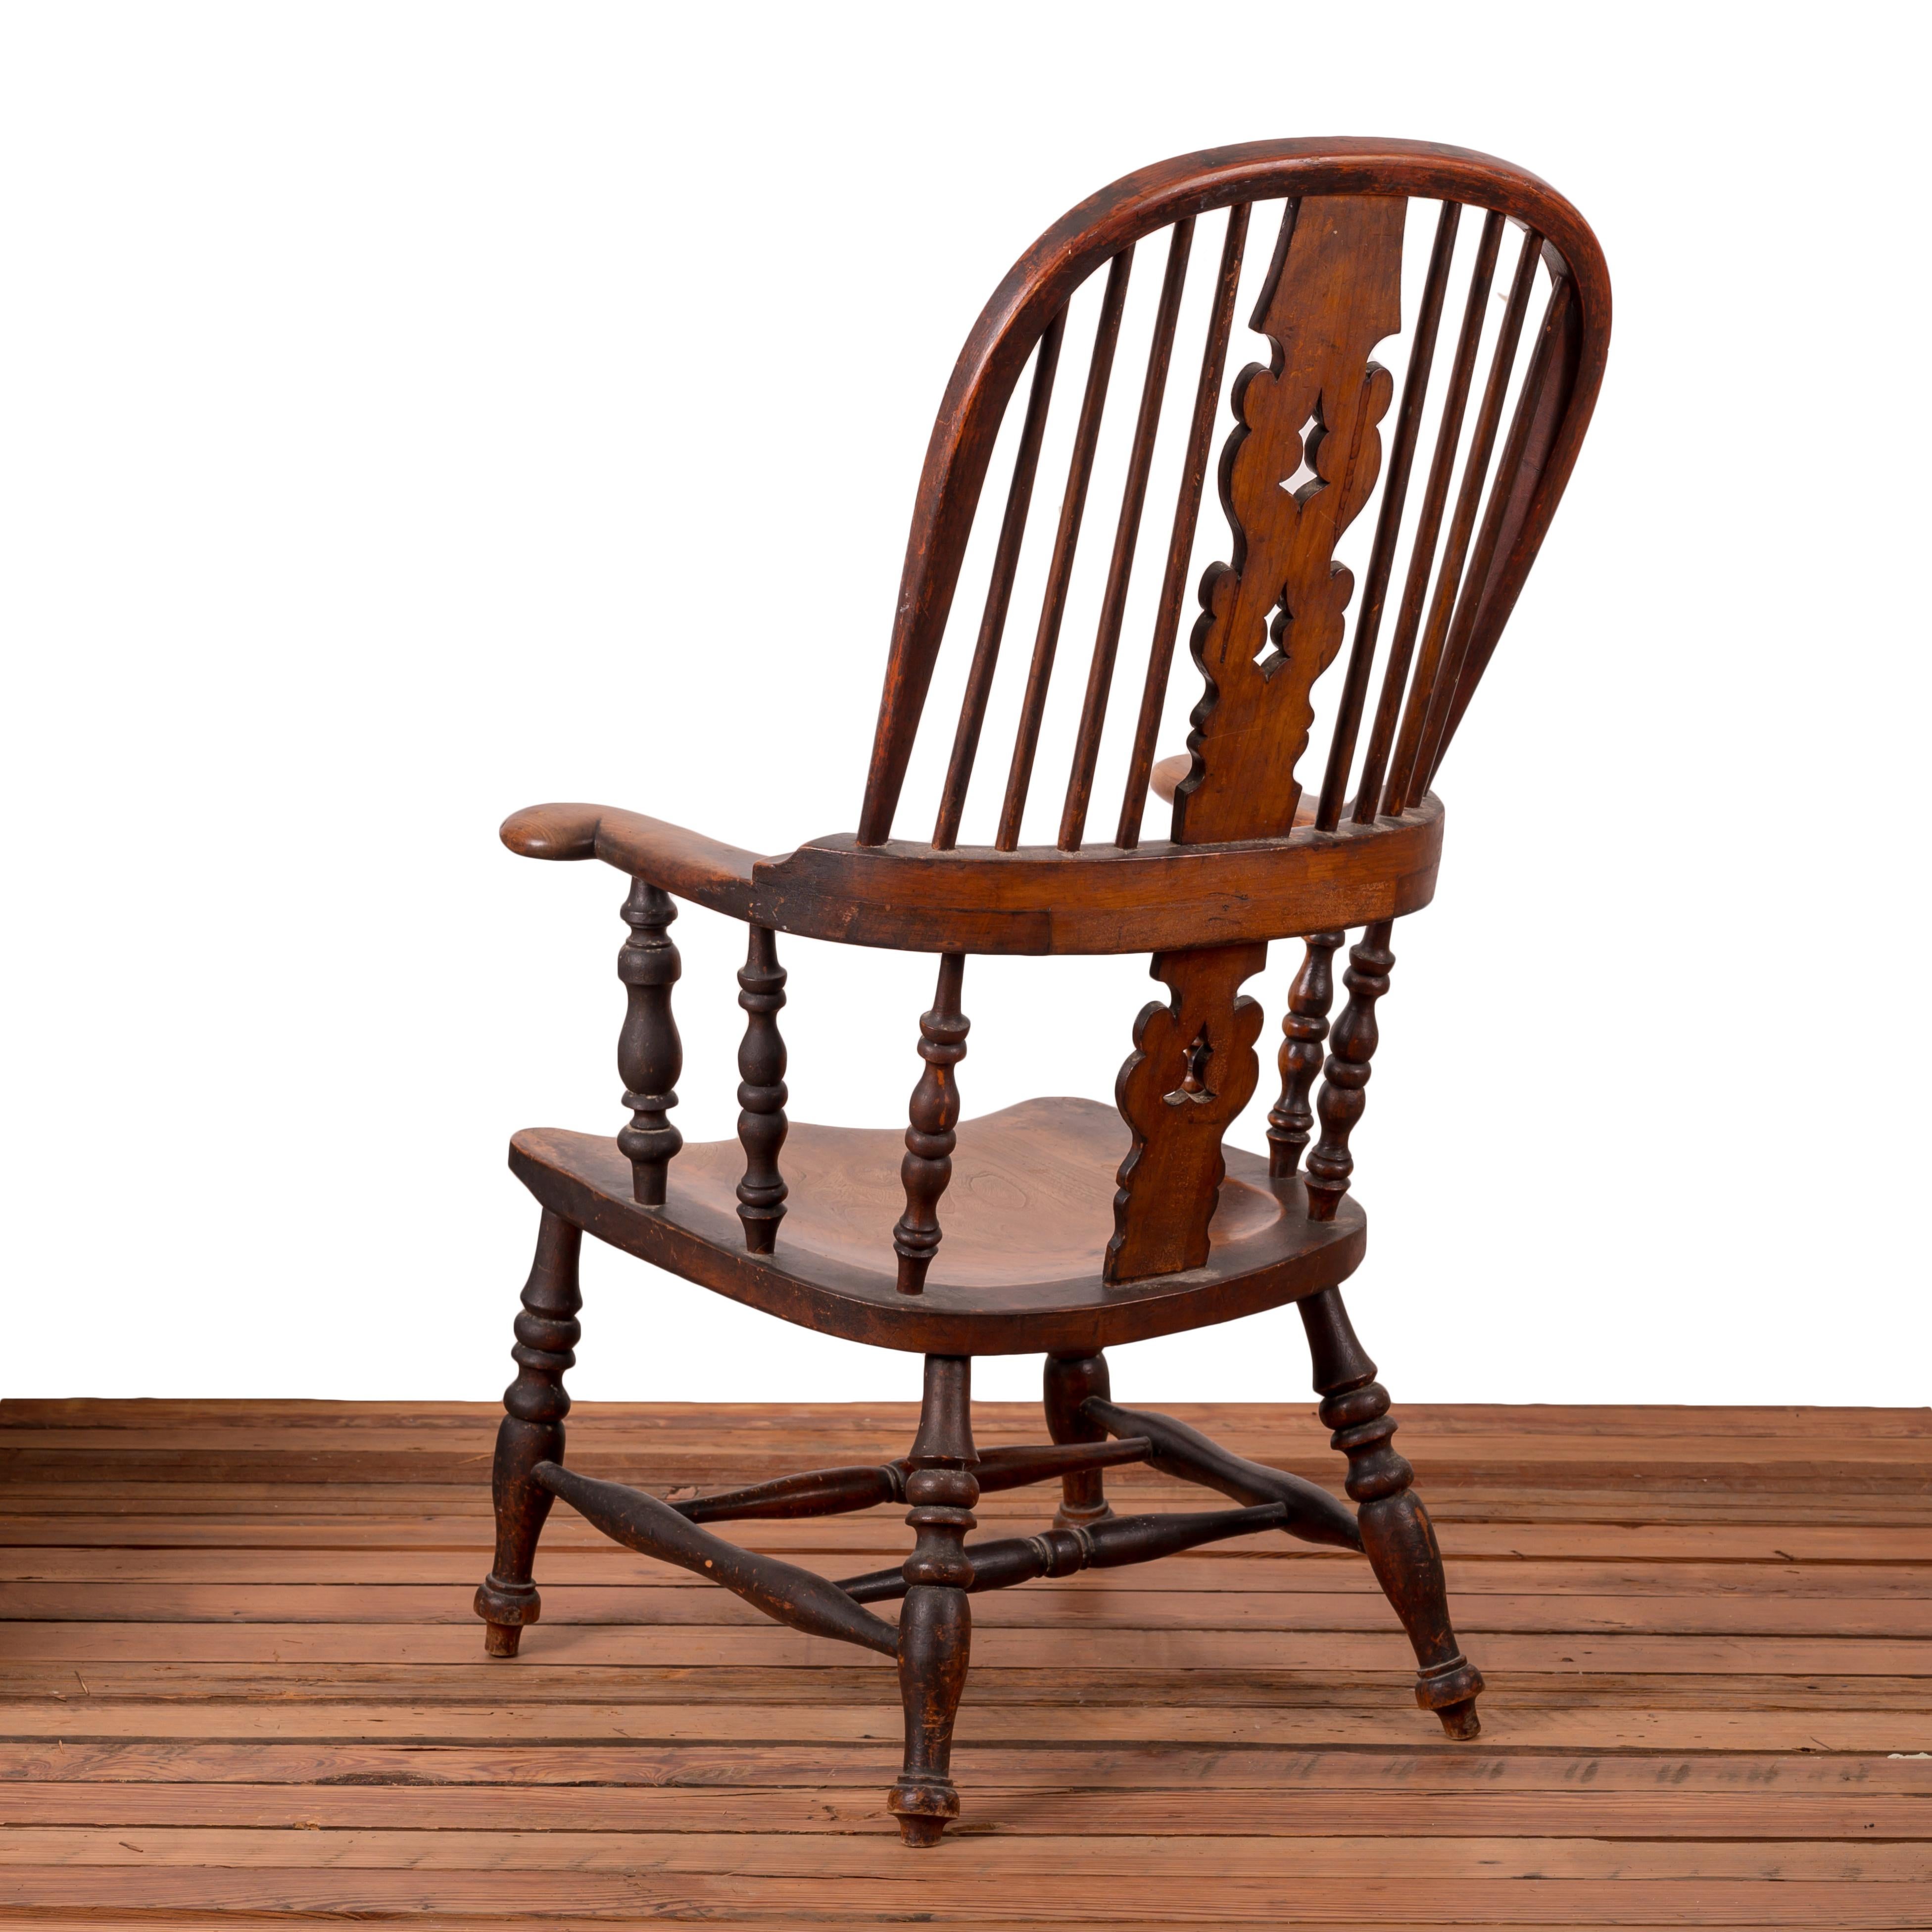 19th Century English Broad Arm Windsor Chair For Sale